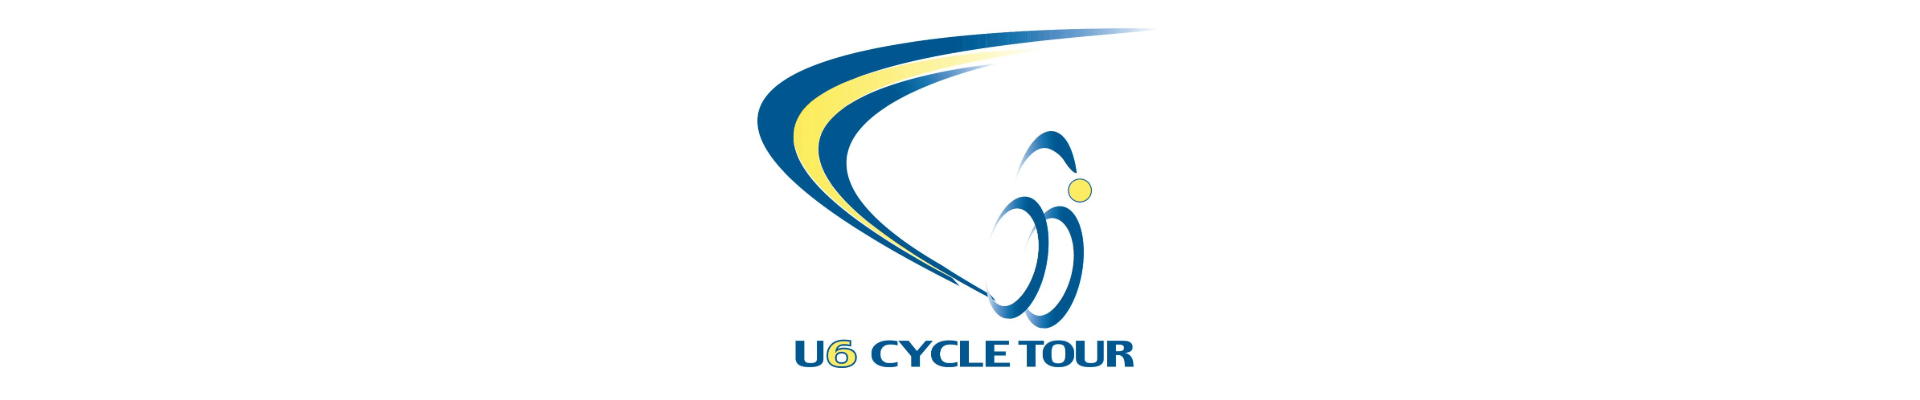 U6 Cycle Tour - stage 5